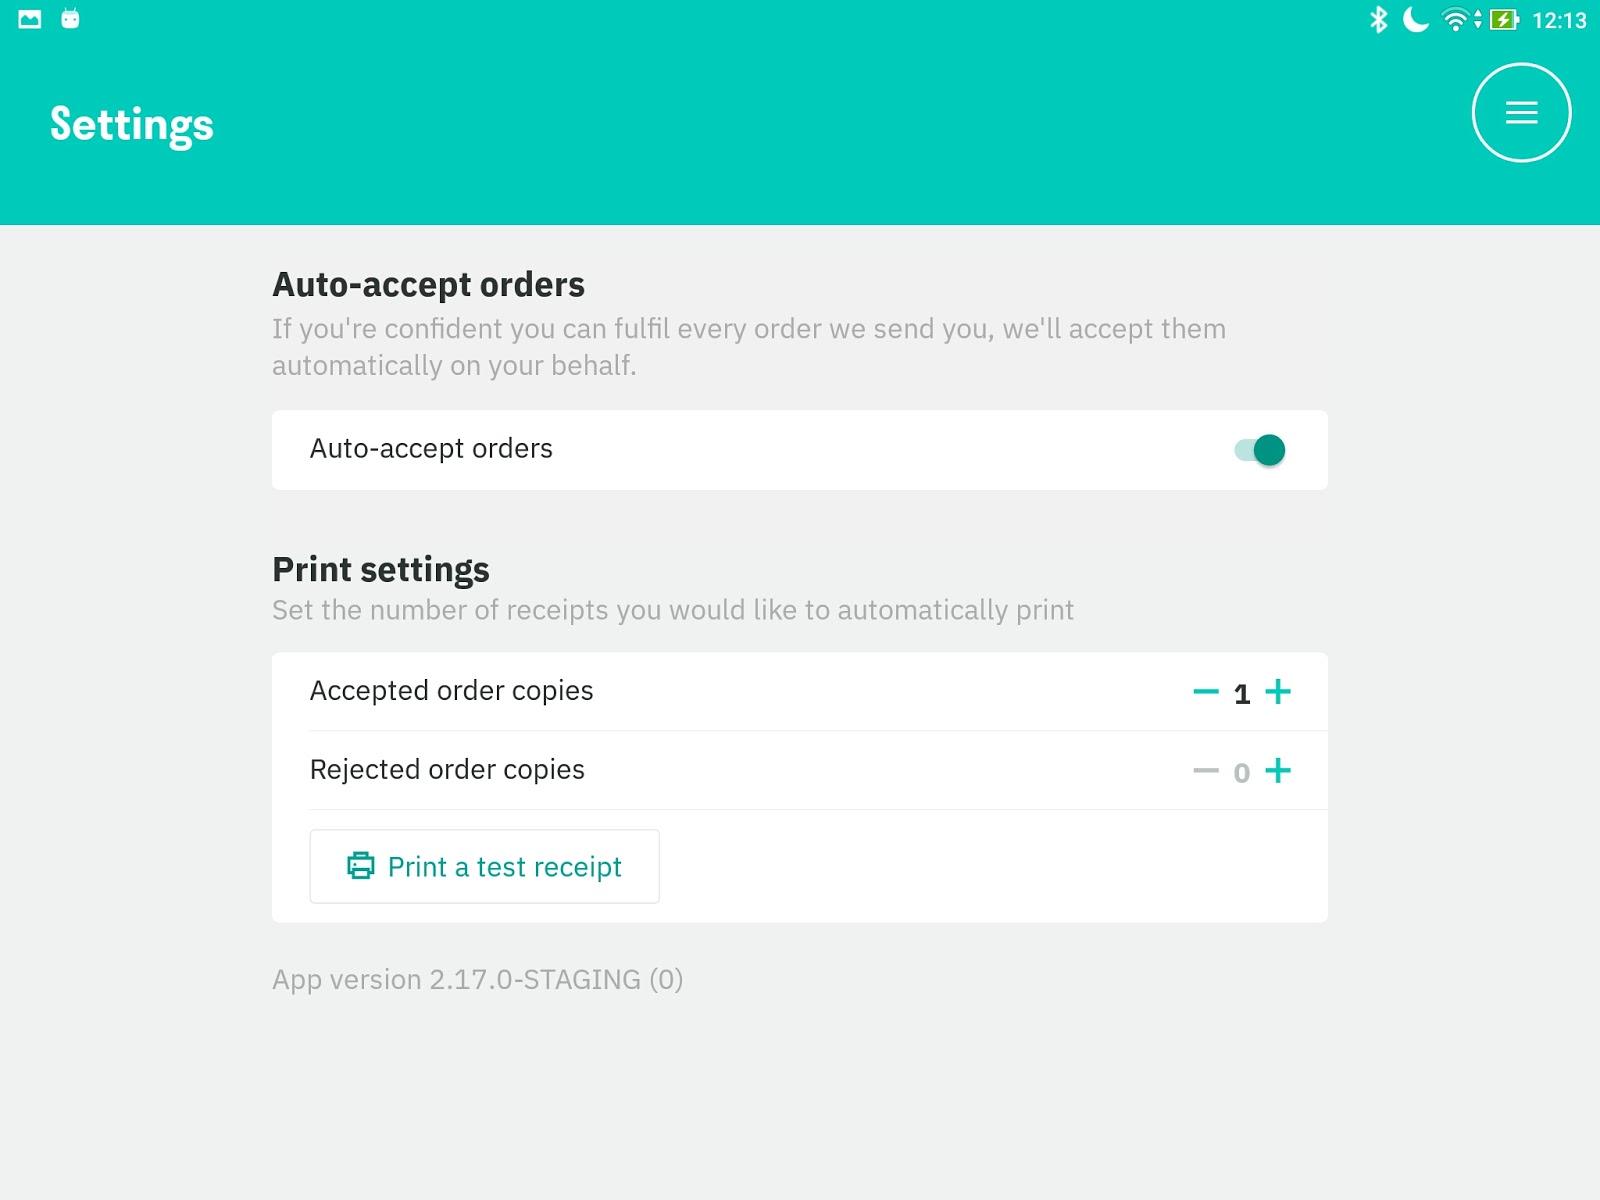 Turn on auto-accept on the Settings page in the tablet